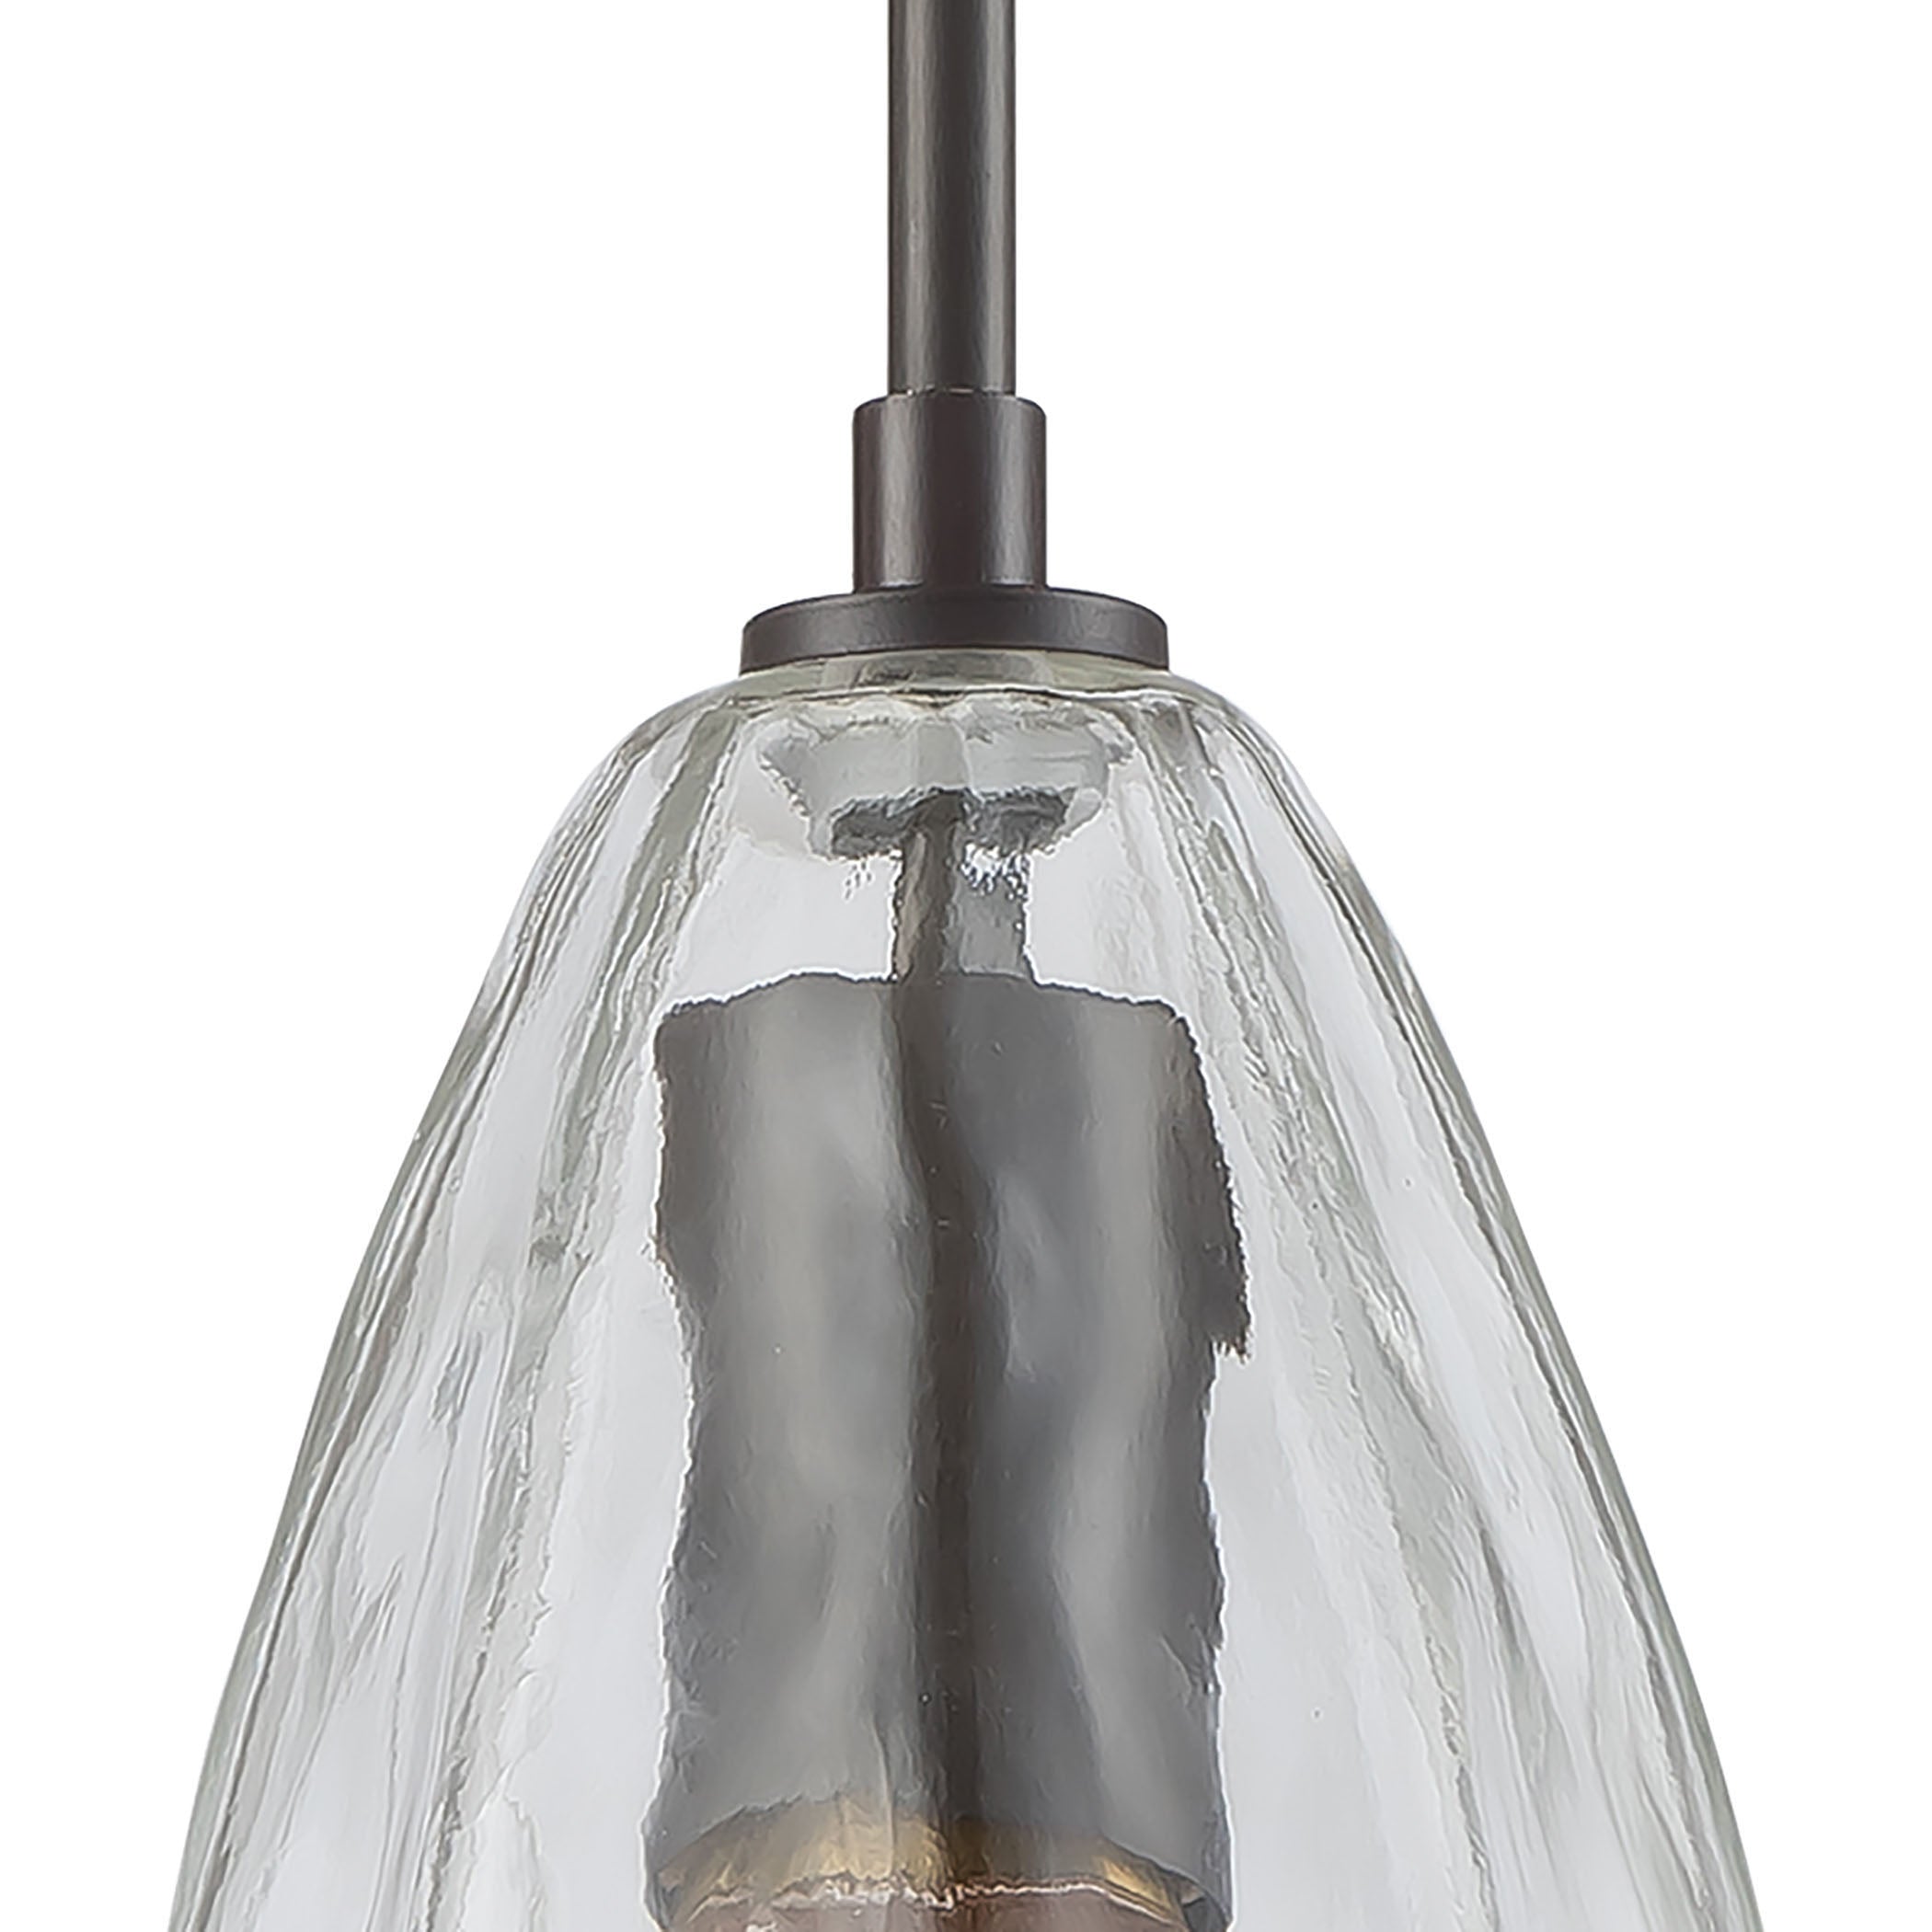 ELK Lighting 10459/1 Hand Formed Glass 1-Light Mini Pendant in Oiled Bronze with Clear Hand-formed Glass